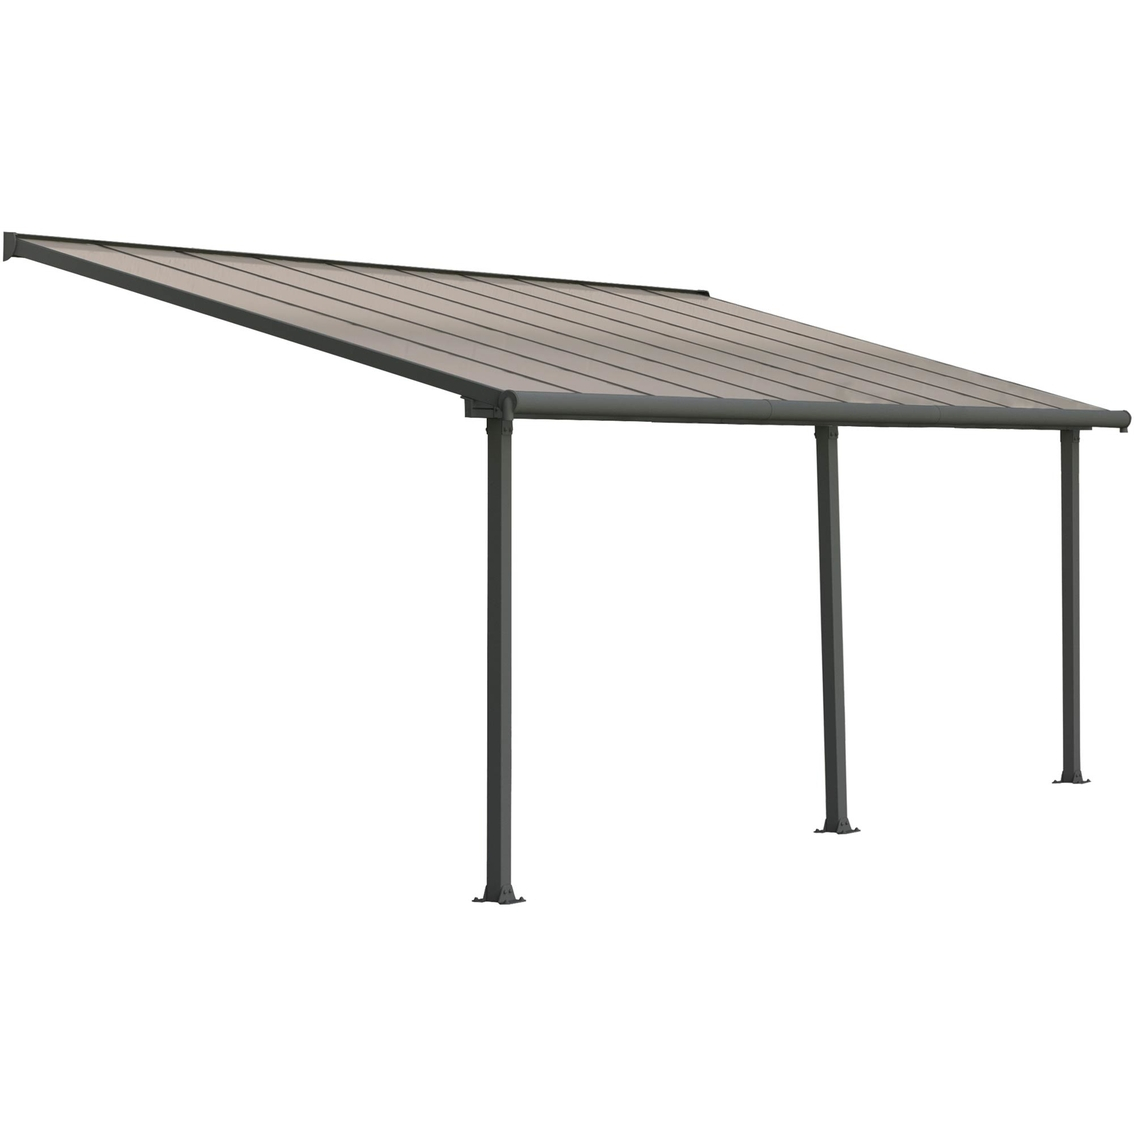 Palram Olympia 10 X 20 Ft Patio Cover Graybronze with regard to dimensions 1134 X 1134